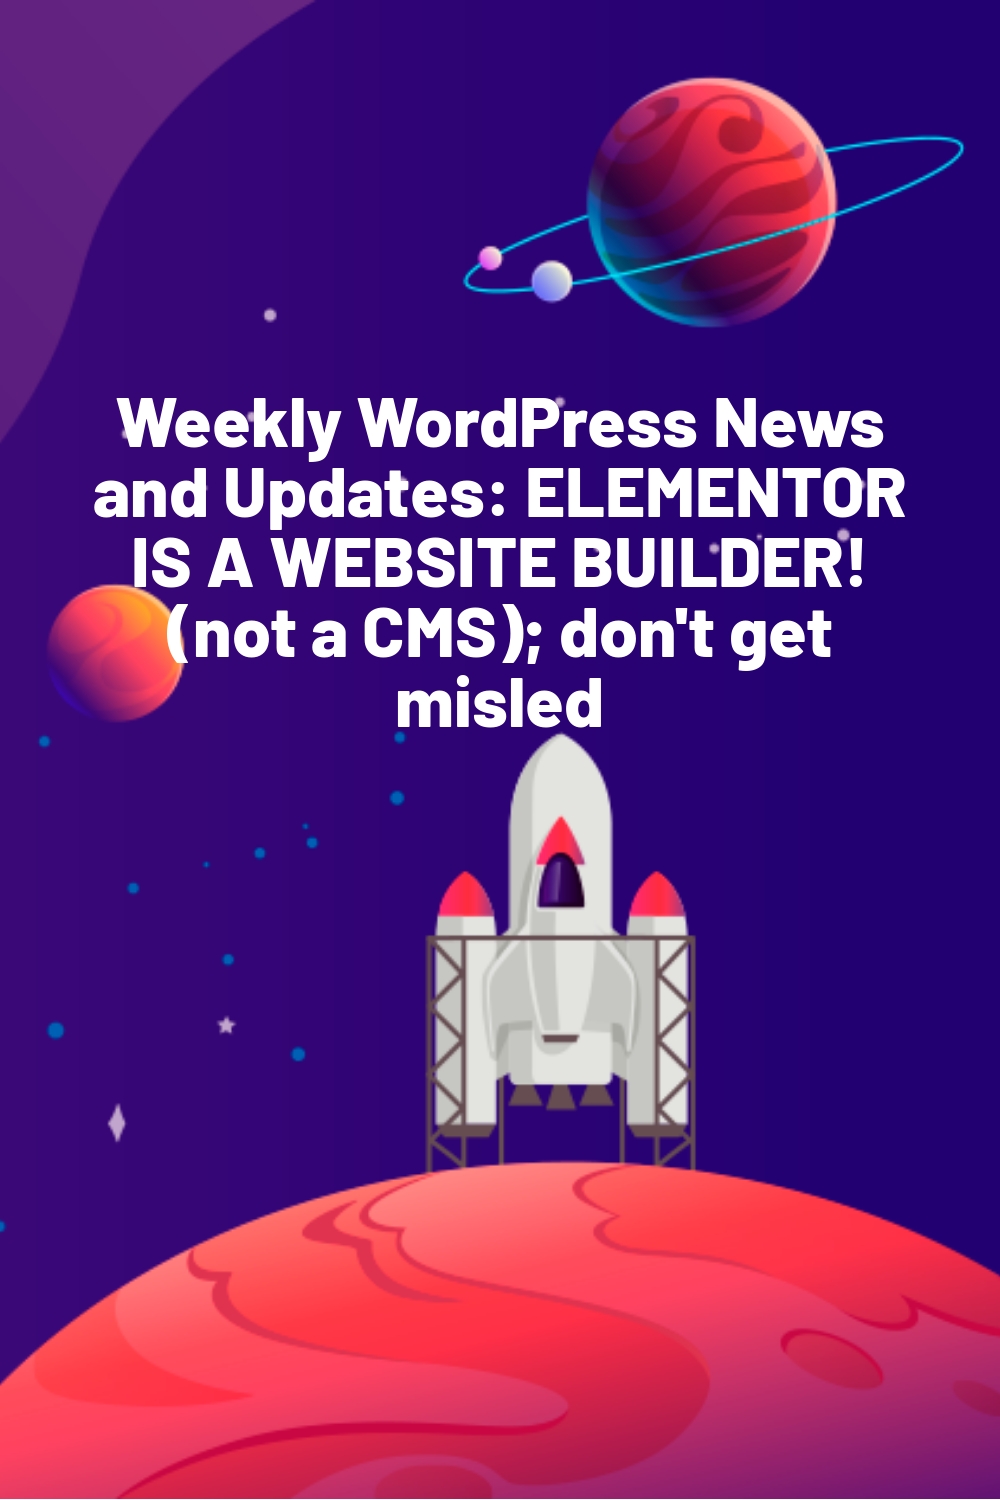 Weekly WordPress News and Updates: ELEMENTOR IS A WEBSITE BUILDER! (not a CMS); don’t get misled